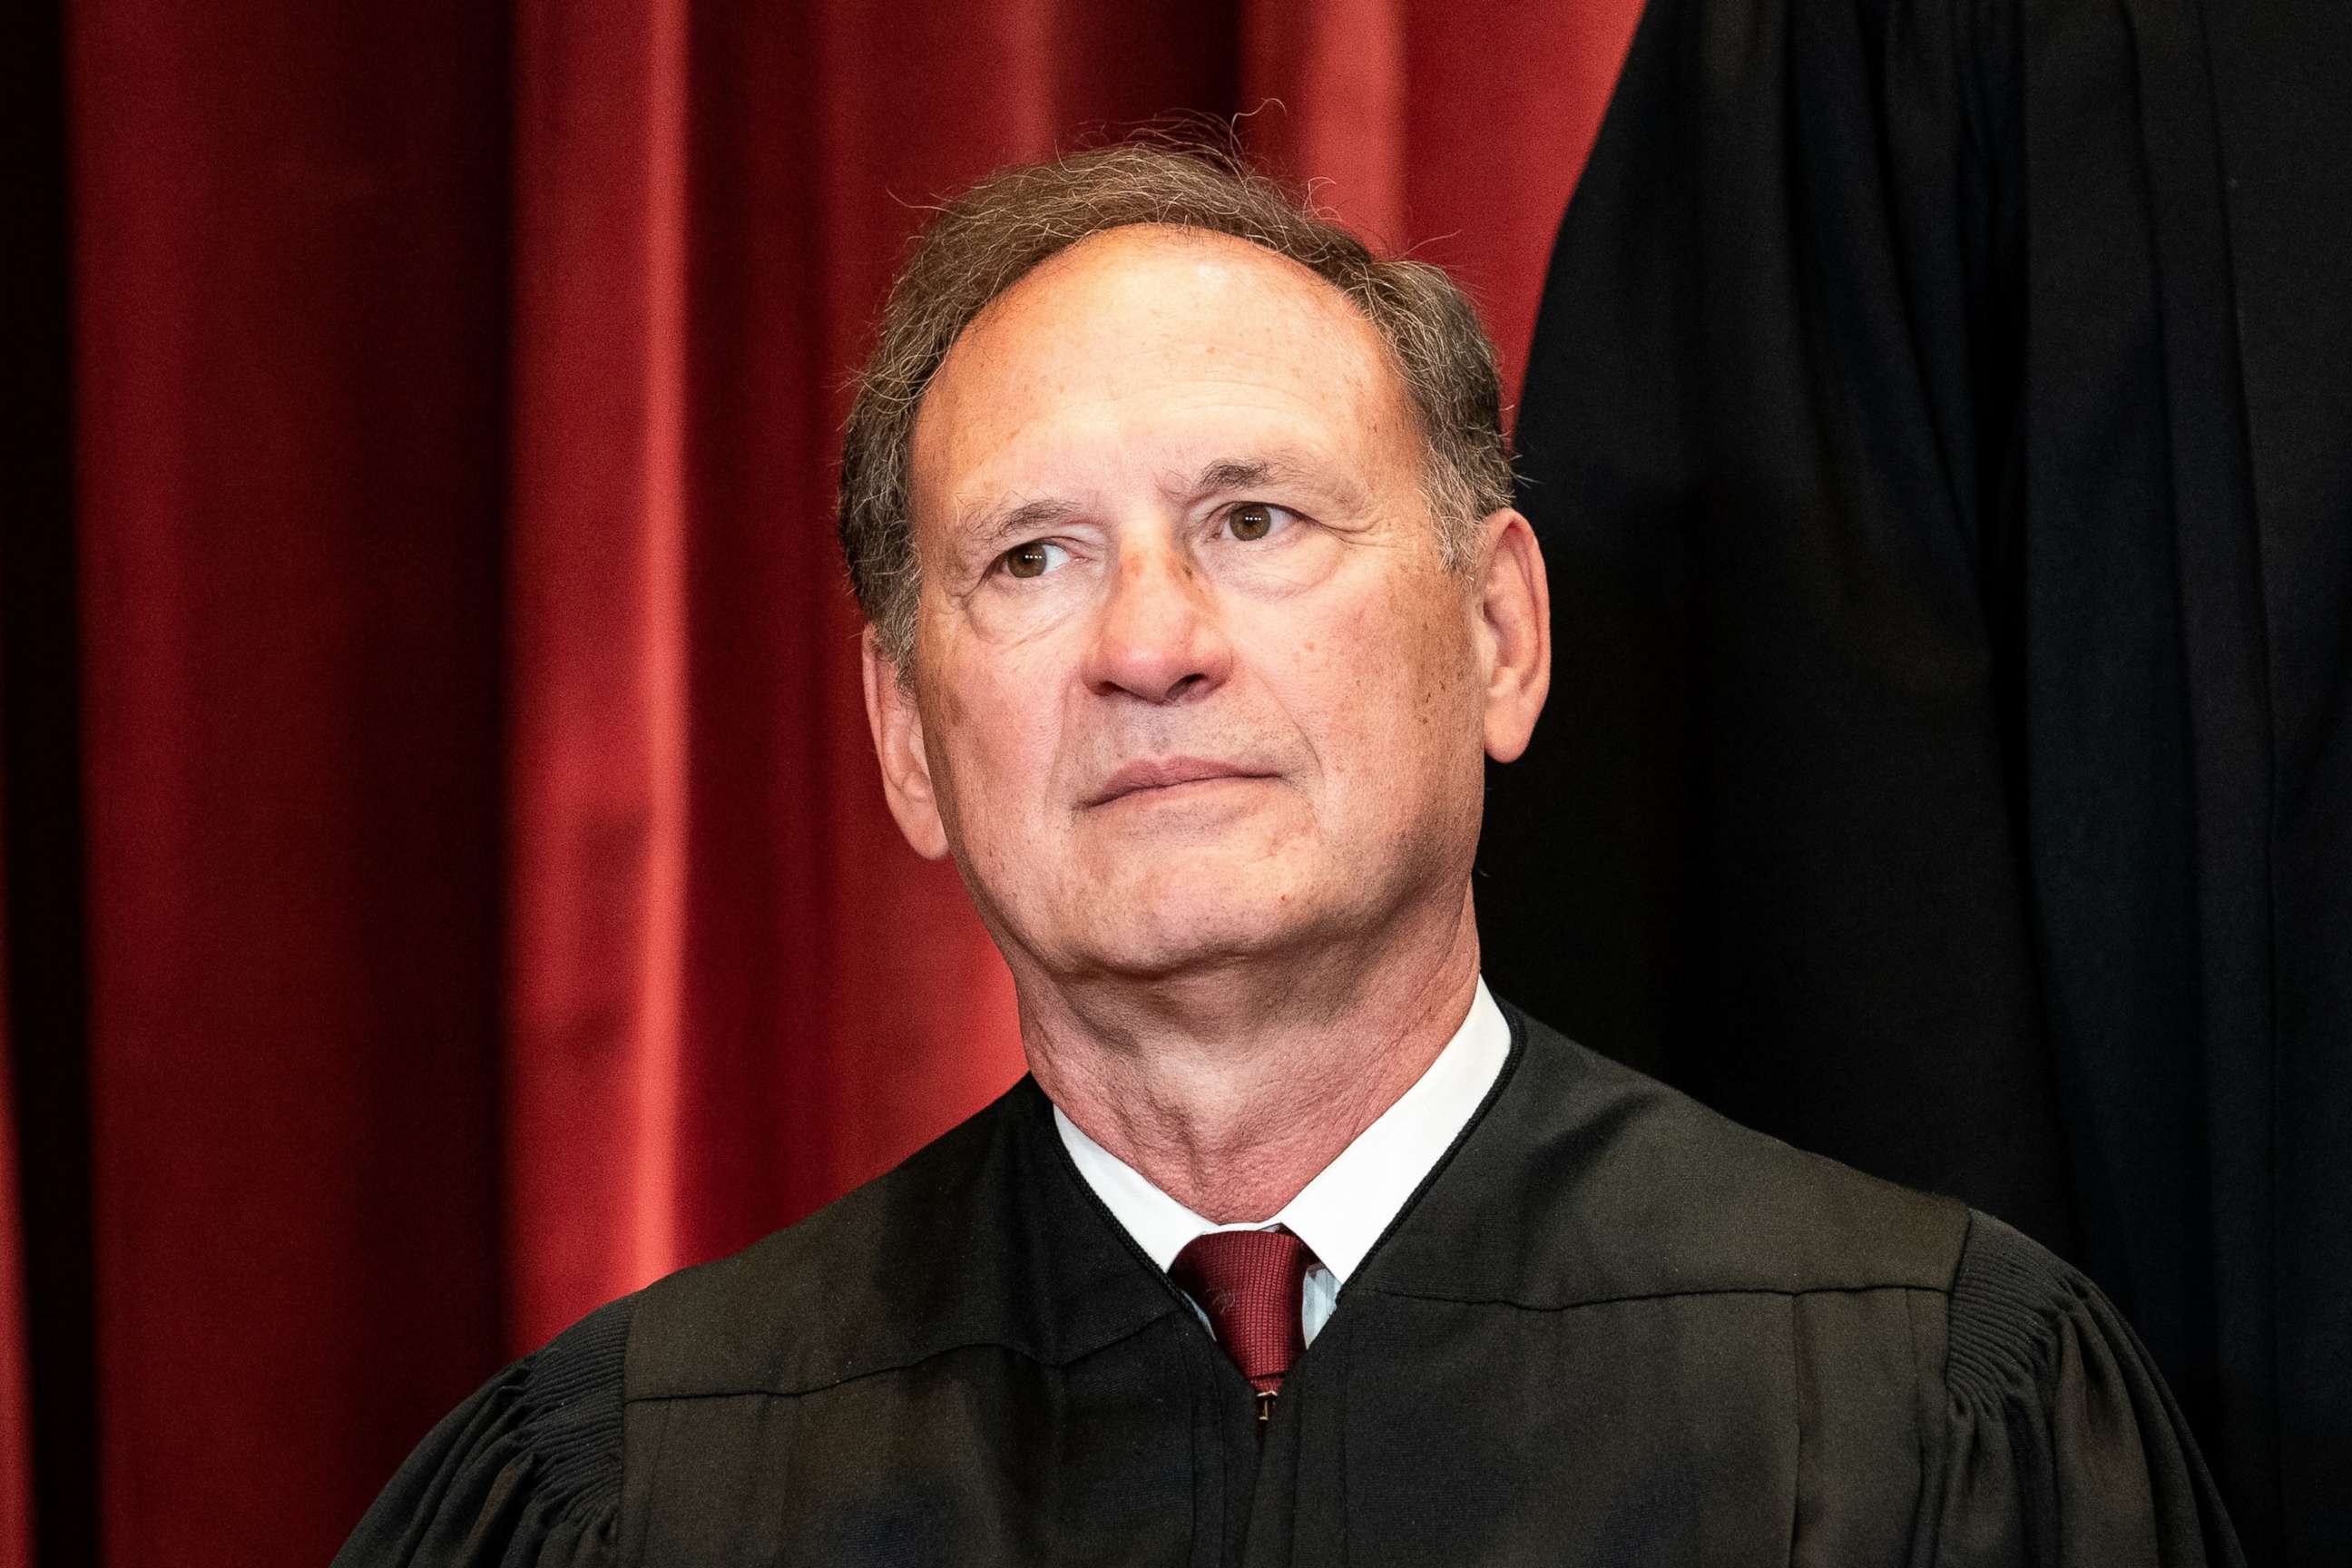 PHOTO: Associate Justice Samuel Alito sits during a group photo of the Justices at the Supreme Court in Washington April 23, 2021.